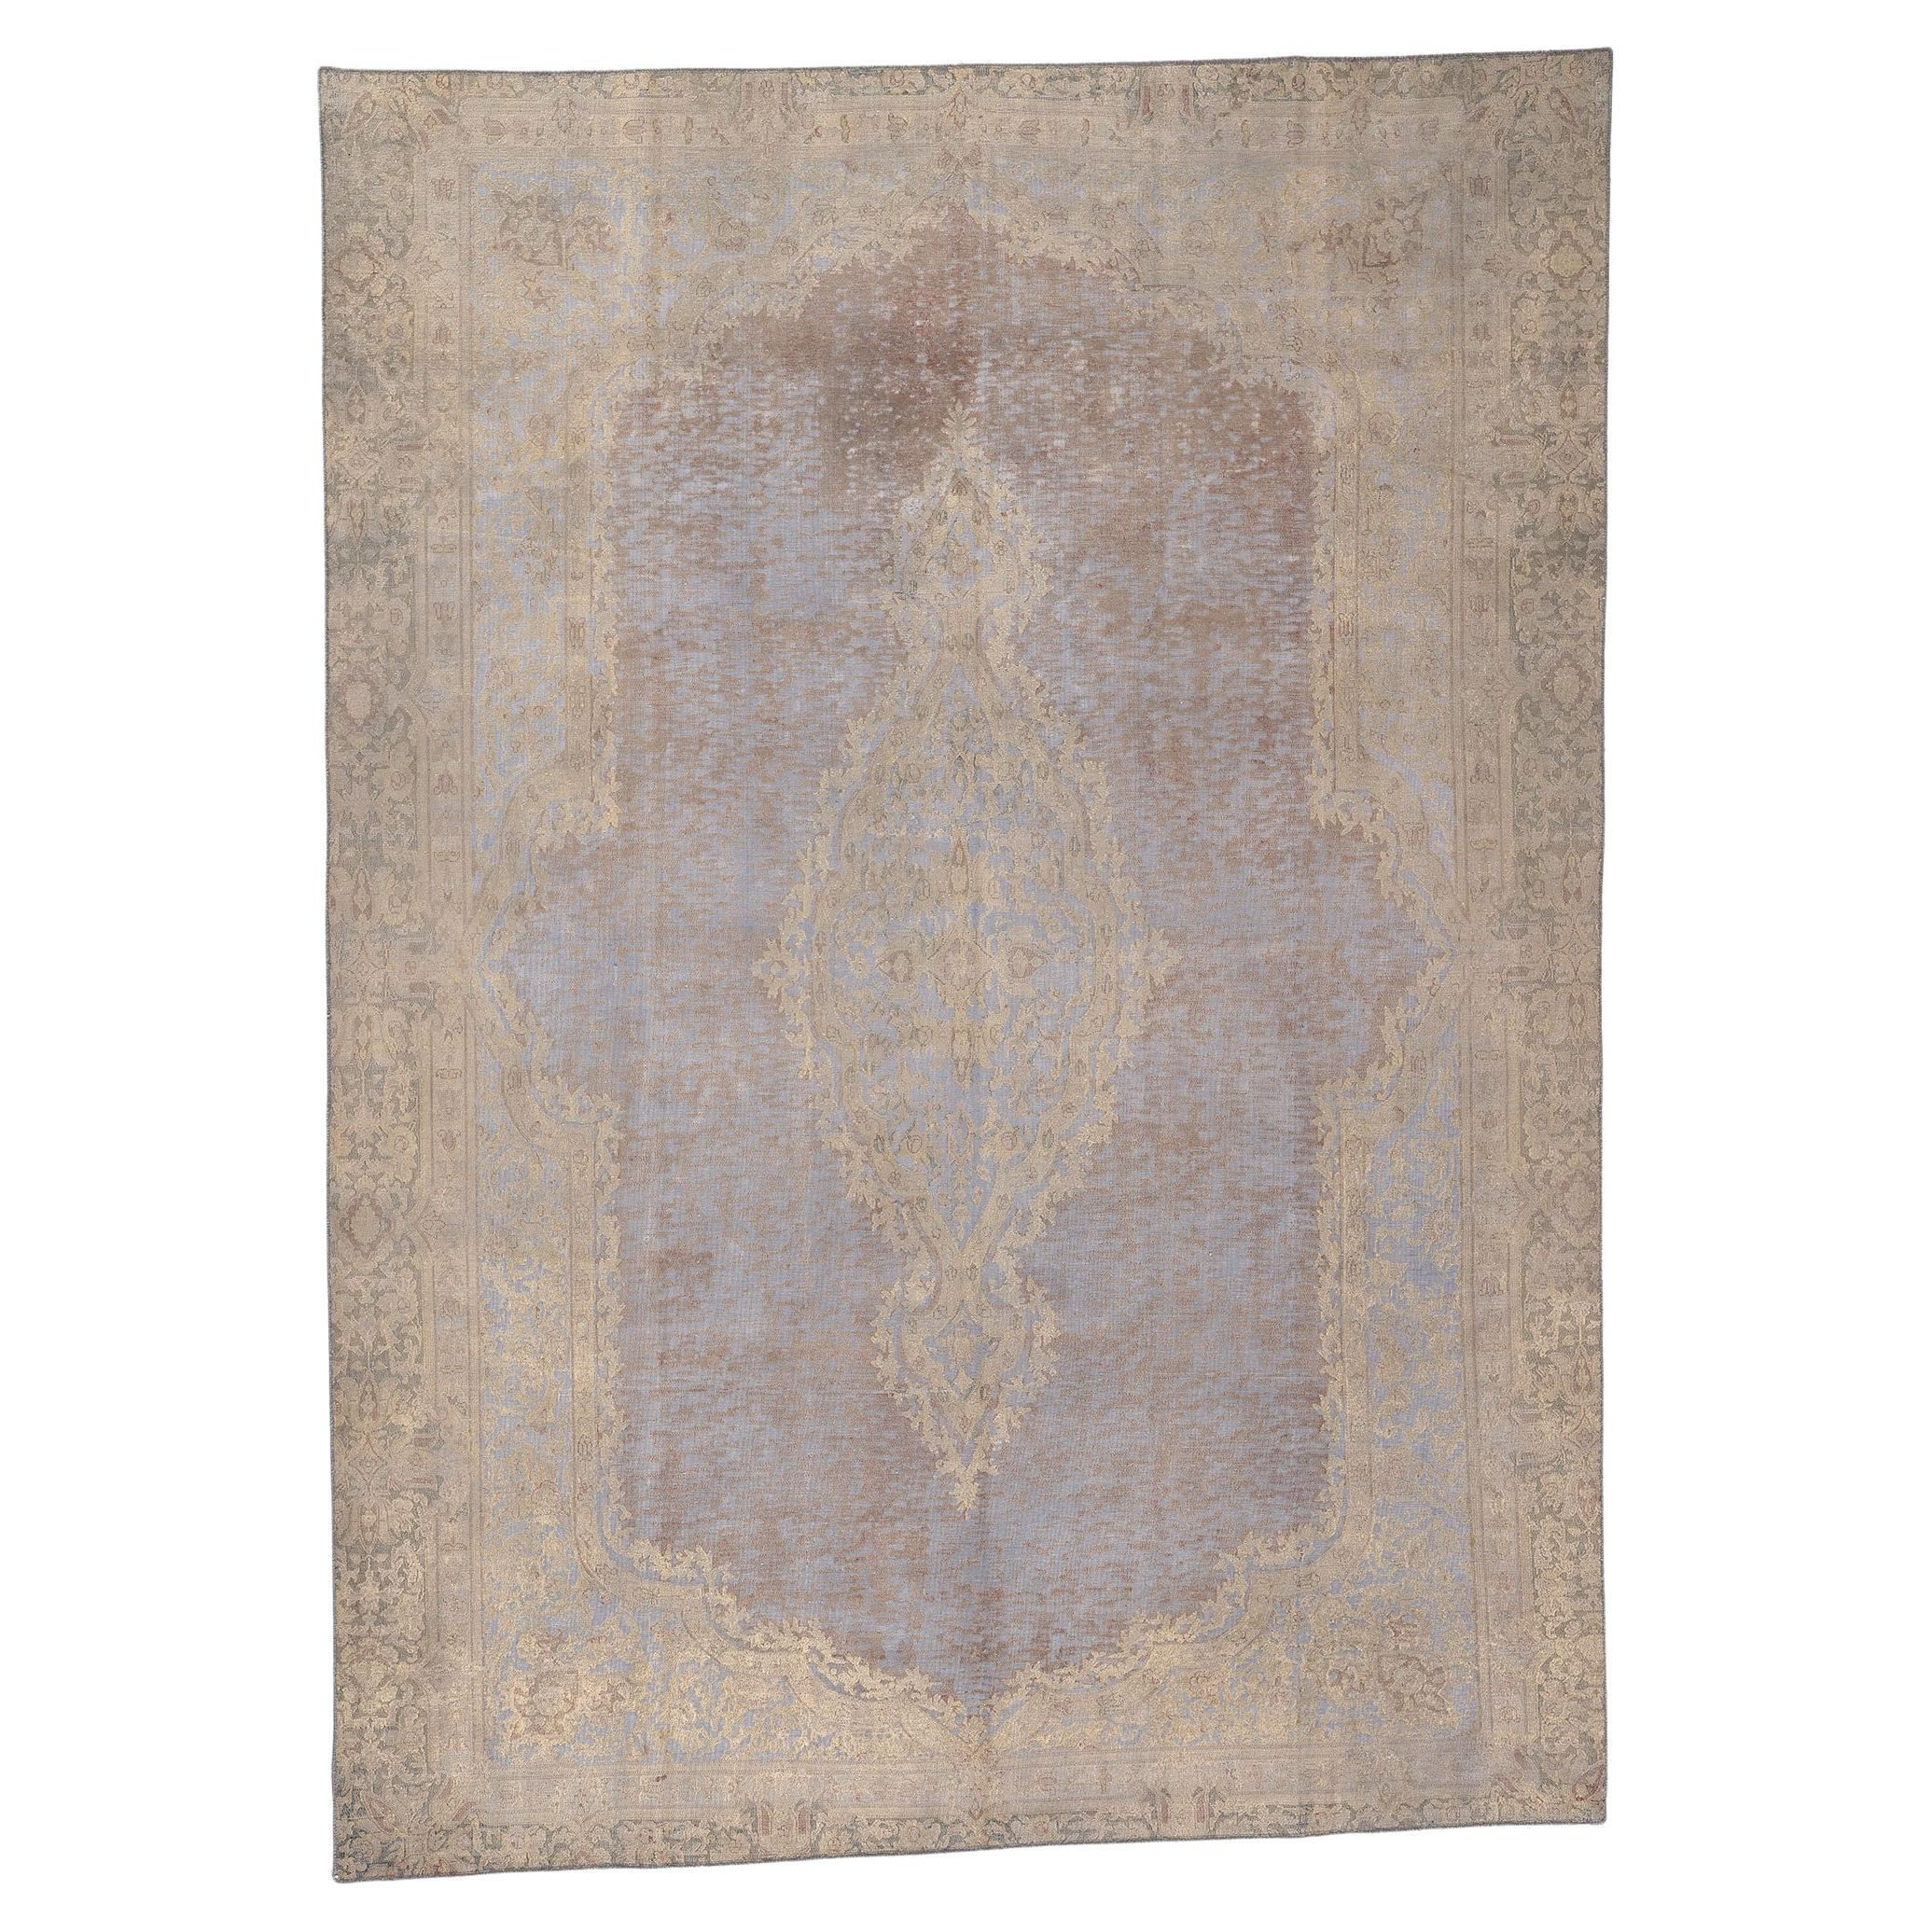 Vintage Turkish Overdyed Rug, French Industrial Meets Luxe Utilitarian Style For Sale